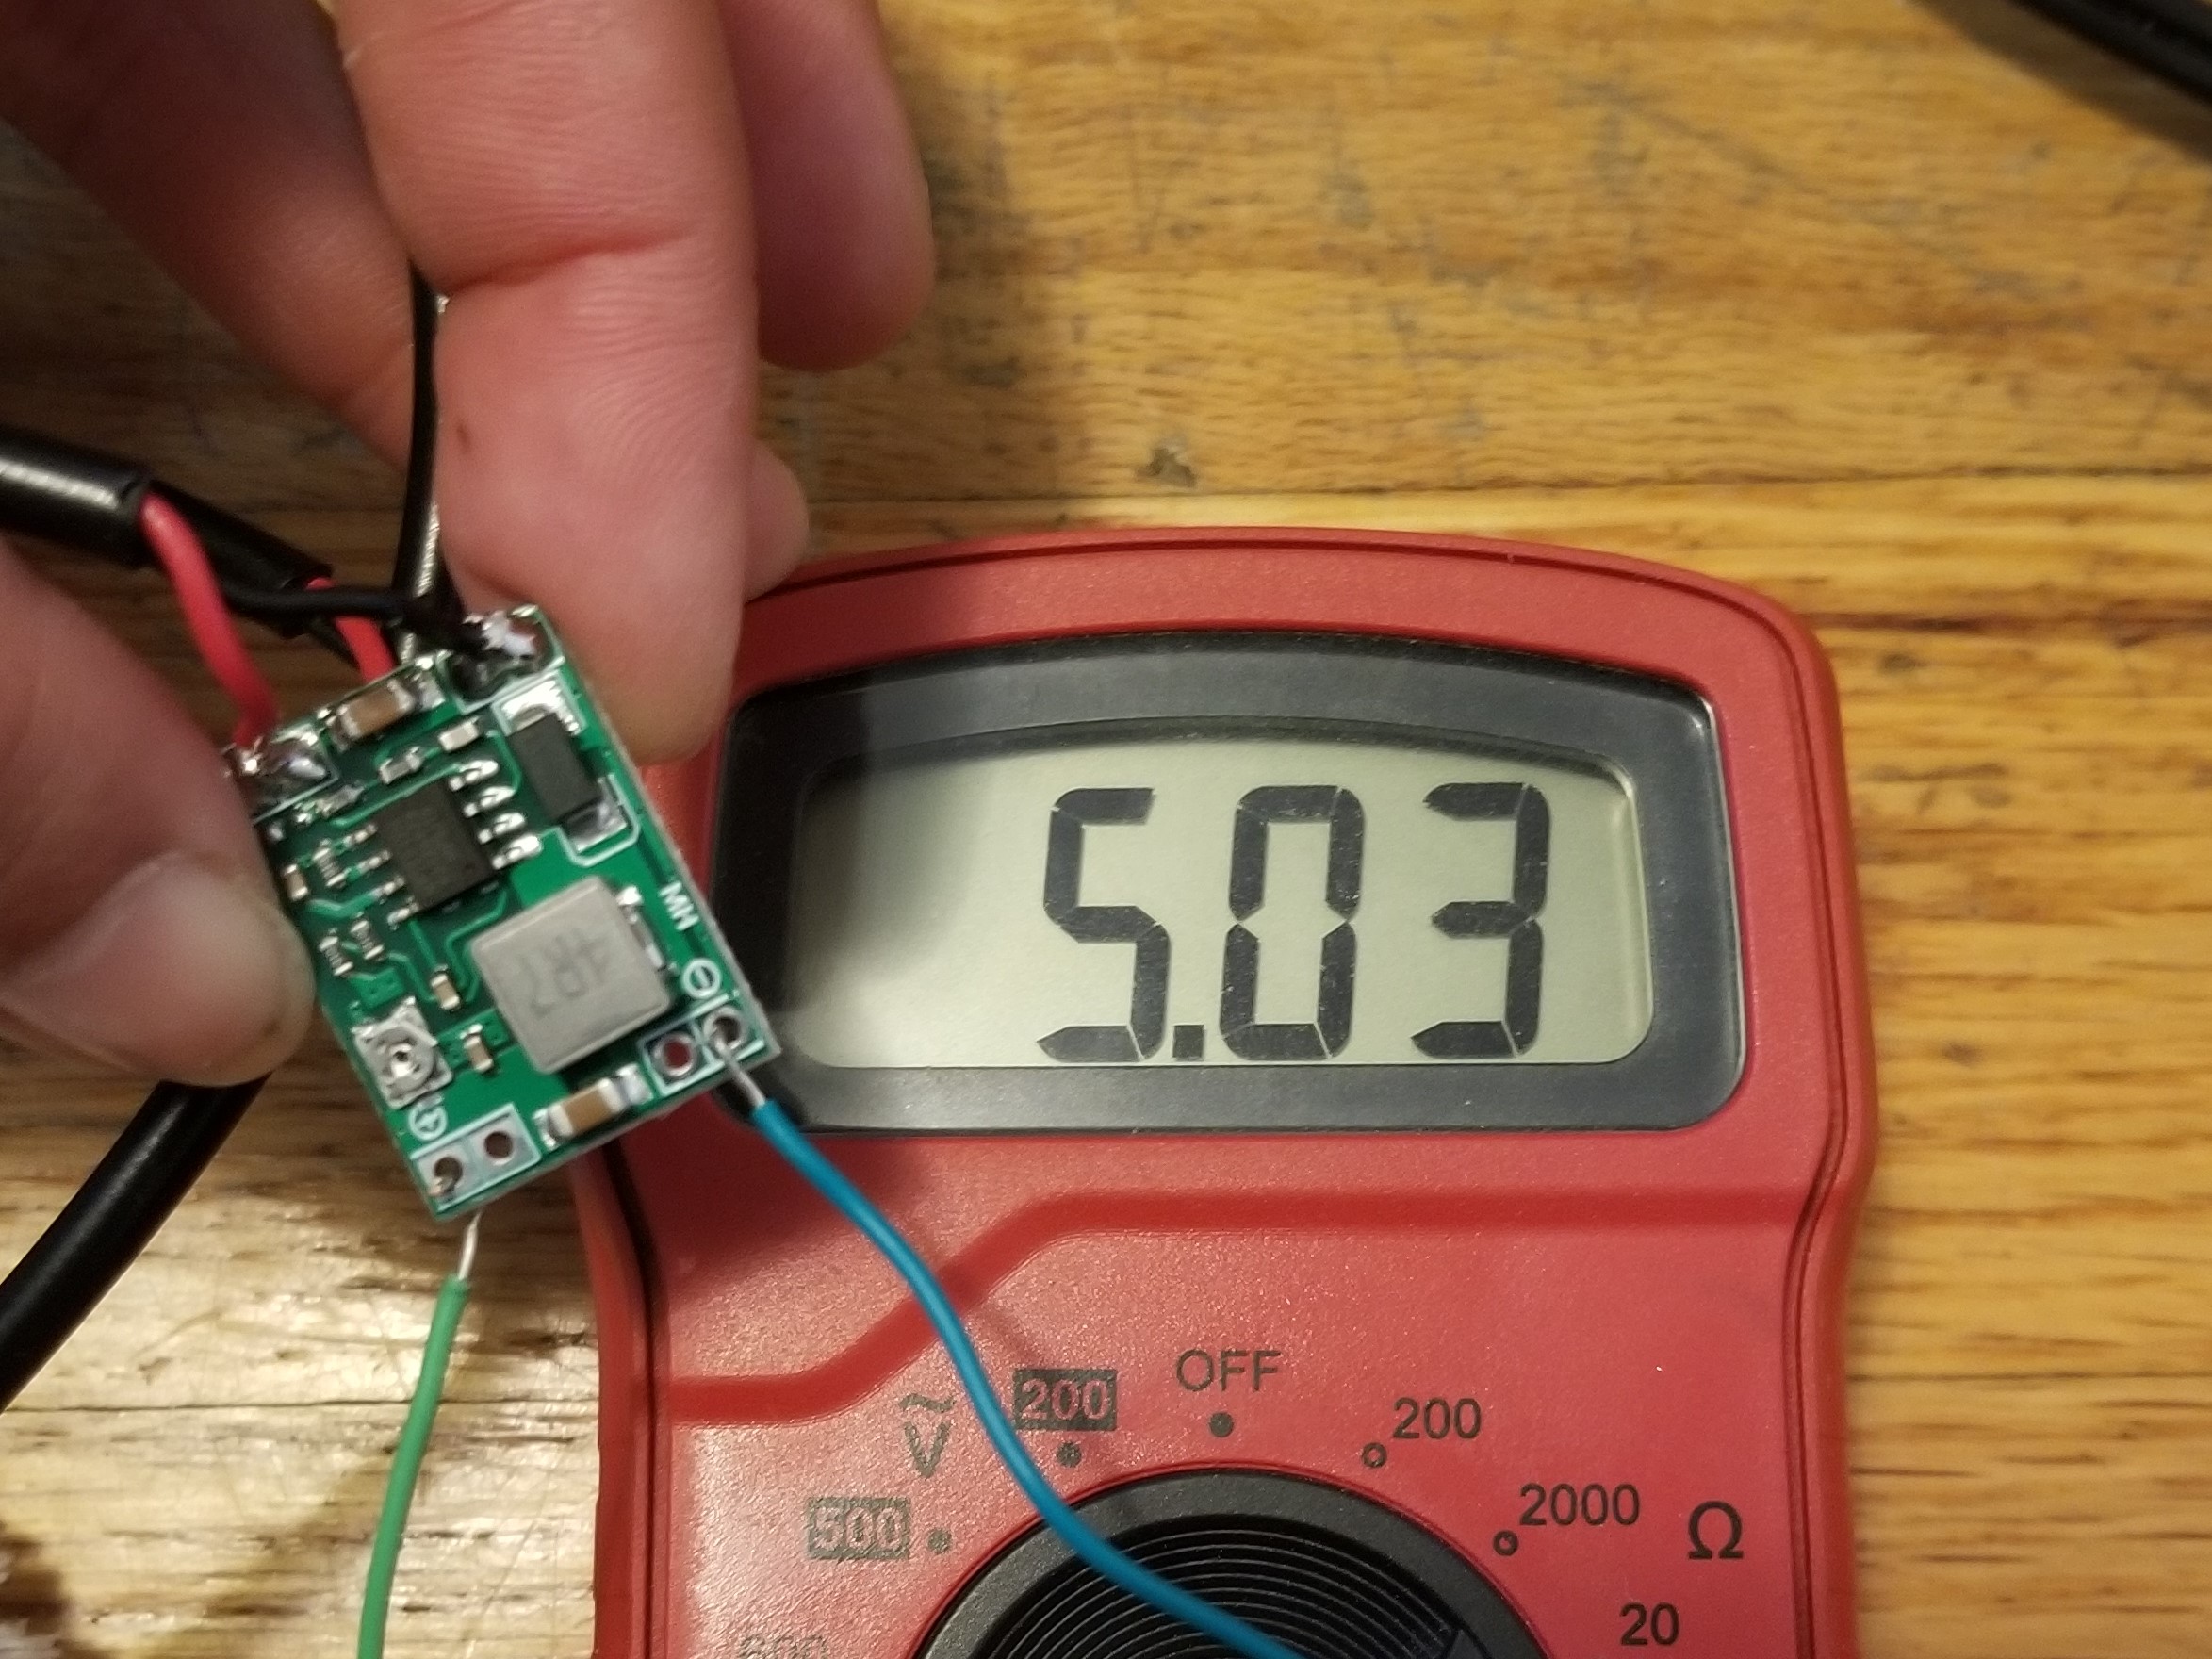 Cover image: a person holds a small voltage regulator PCB in front of a multimeter measuring its output voltage. The multimeter reads 5.03V.